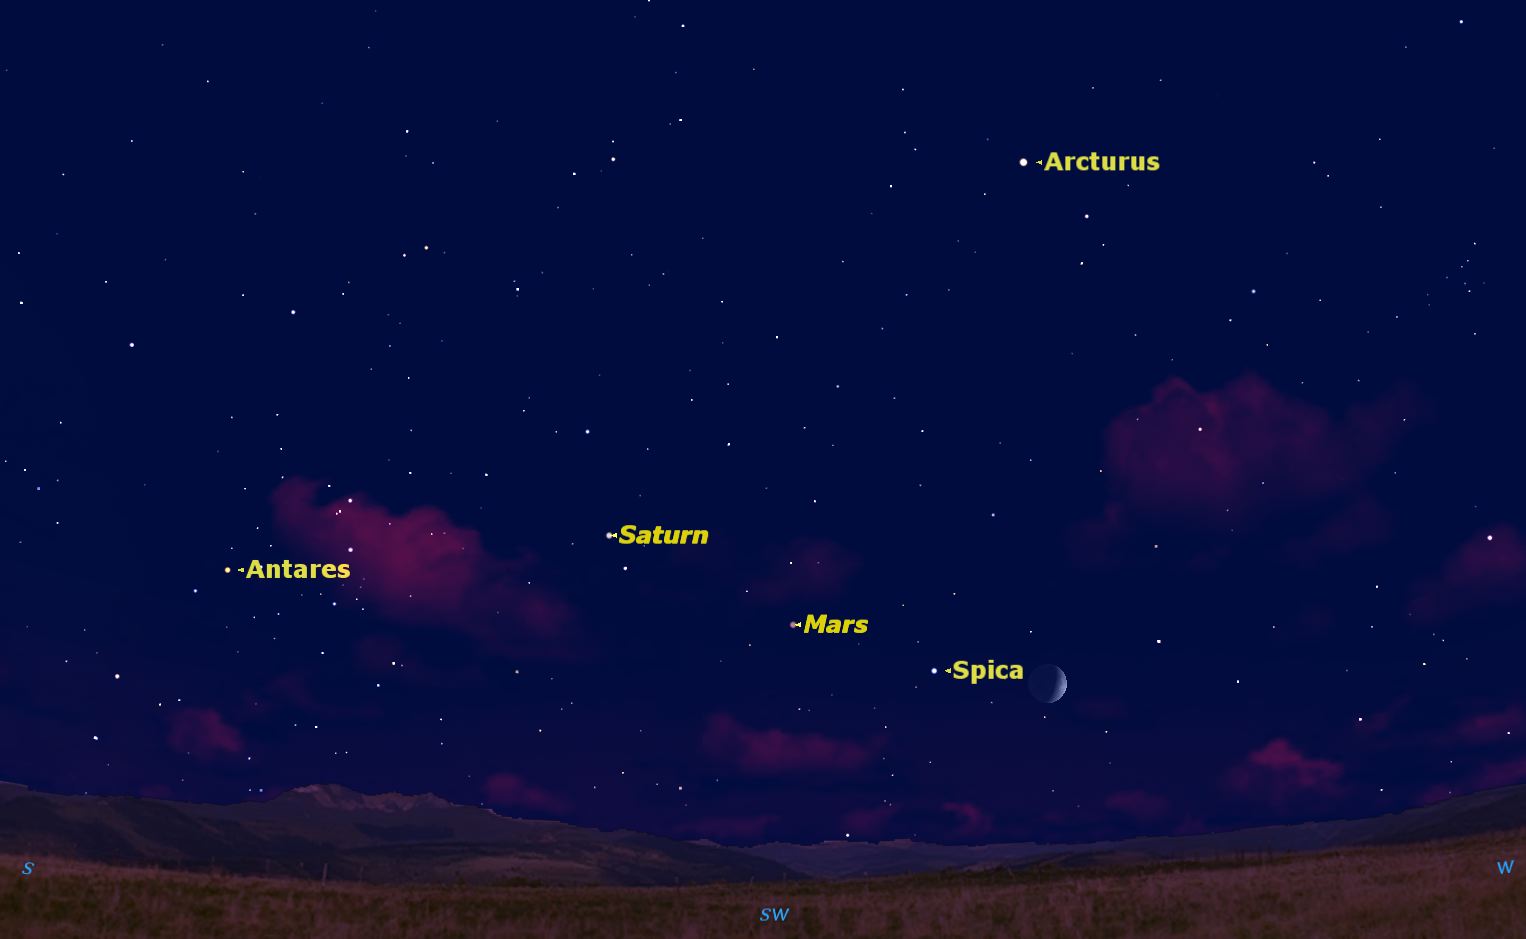 On August 1, the Moon appears to the right (west) of Spica. Credit: Starry Night software.